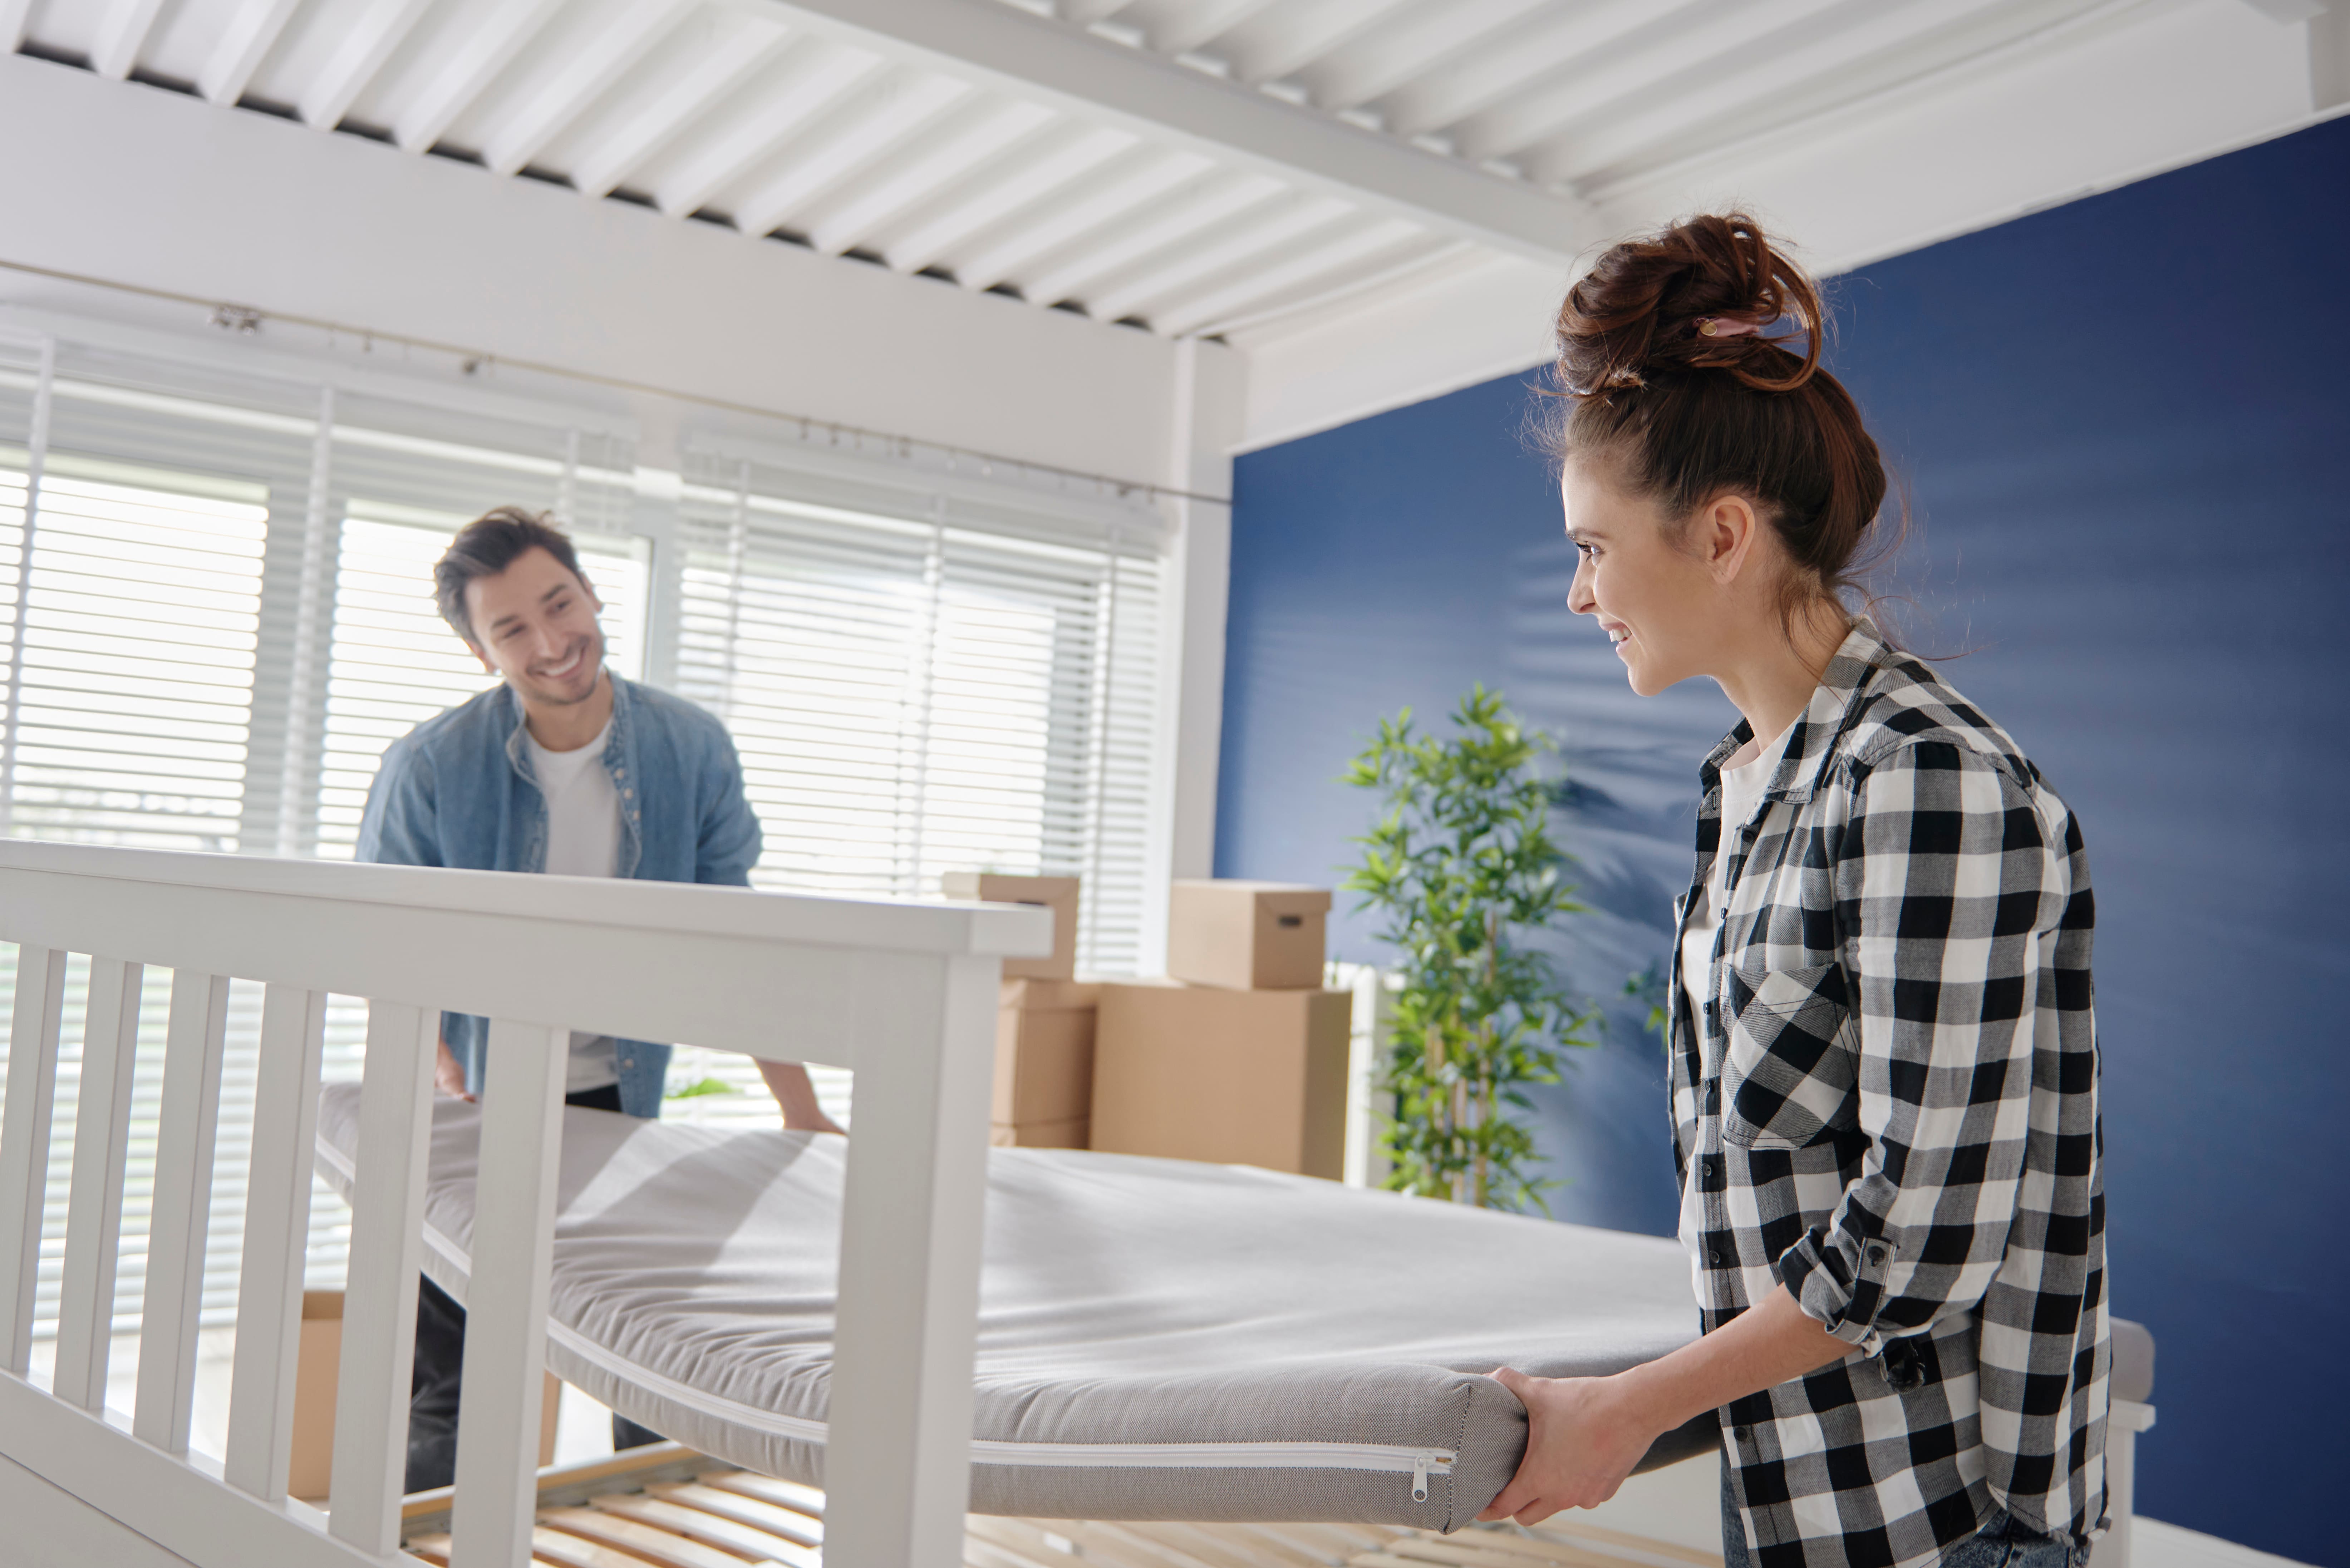 A man and woman manoeuvring their new mattress onto their new bed frame. Both are smiling and in the background, cardboard boxes and a houseplant are visible against a blue feature wall.